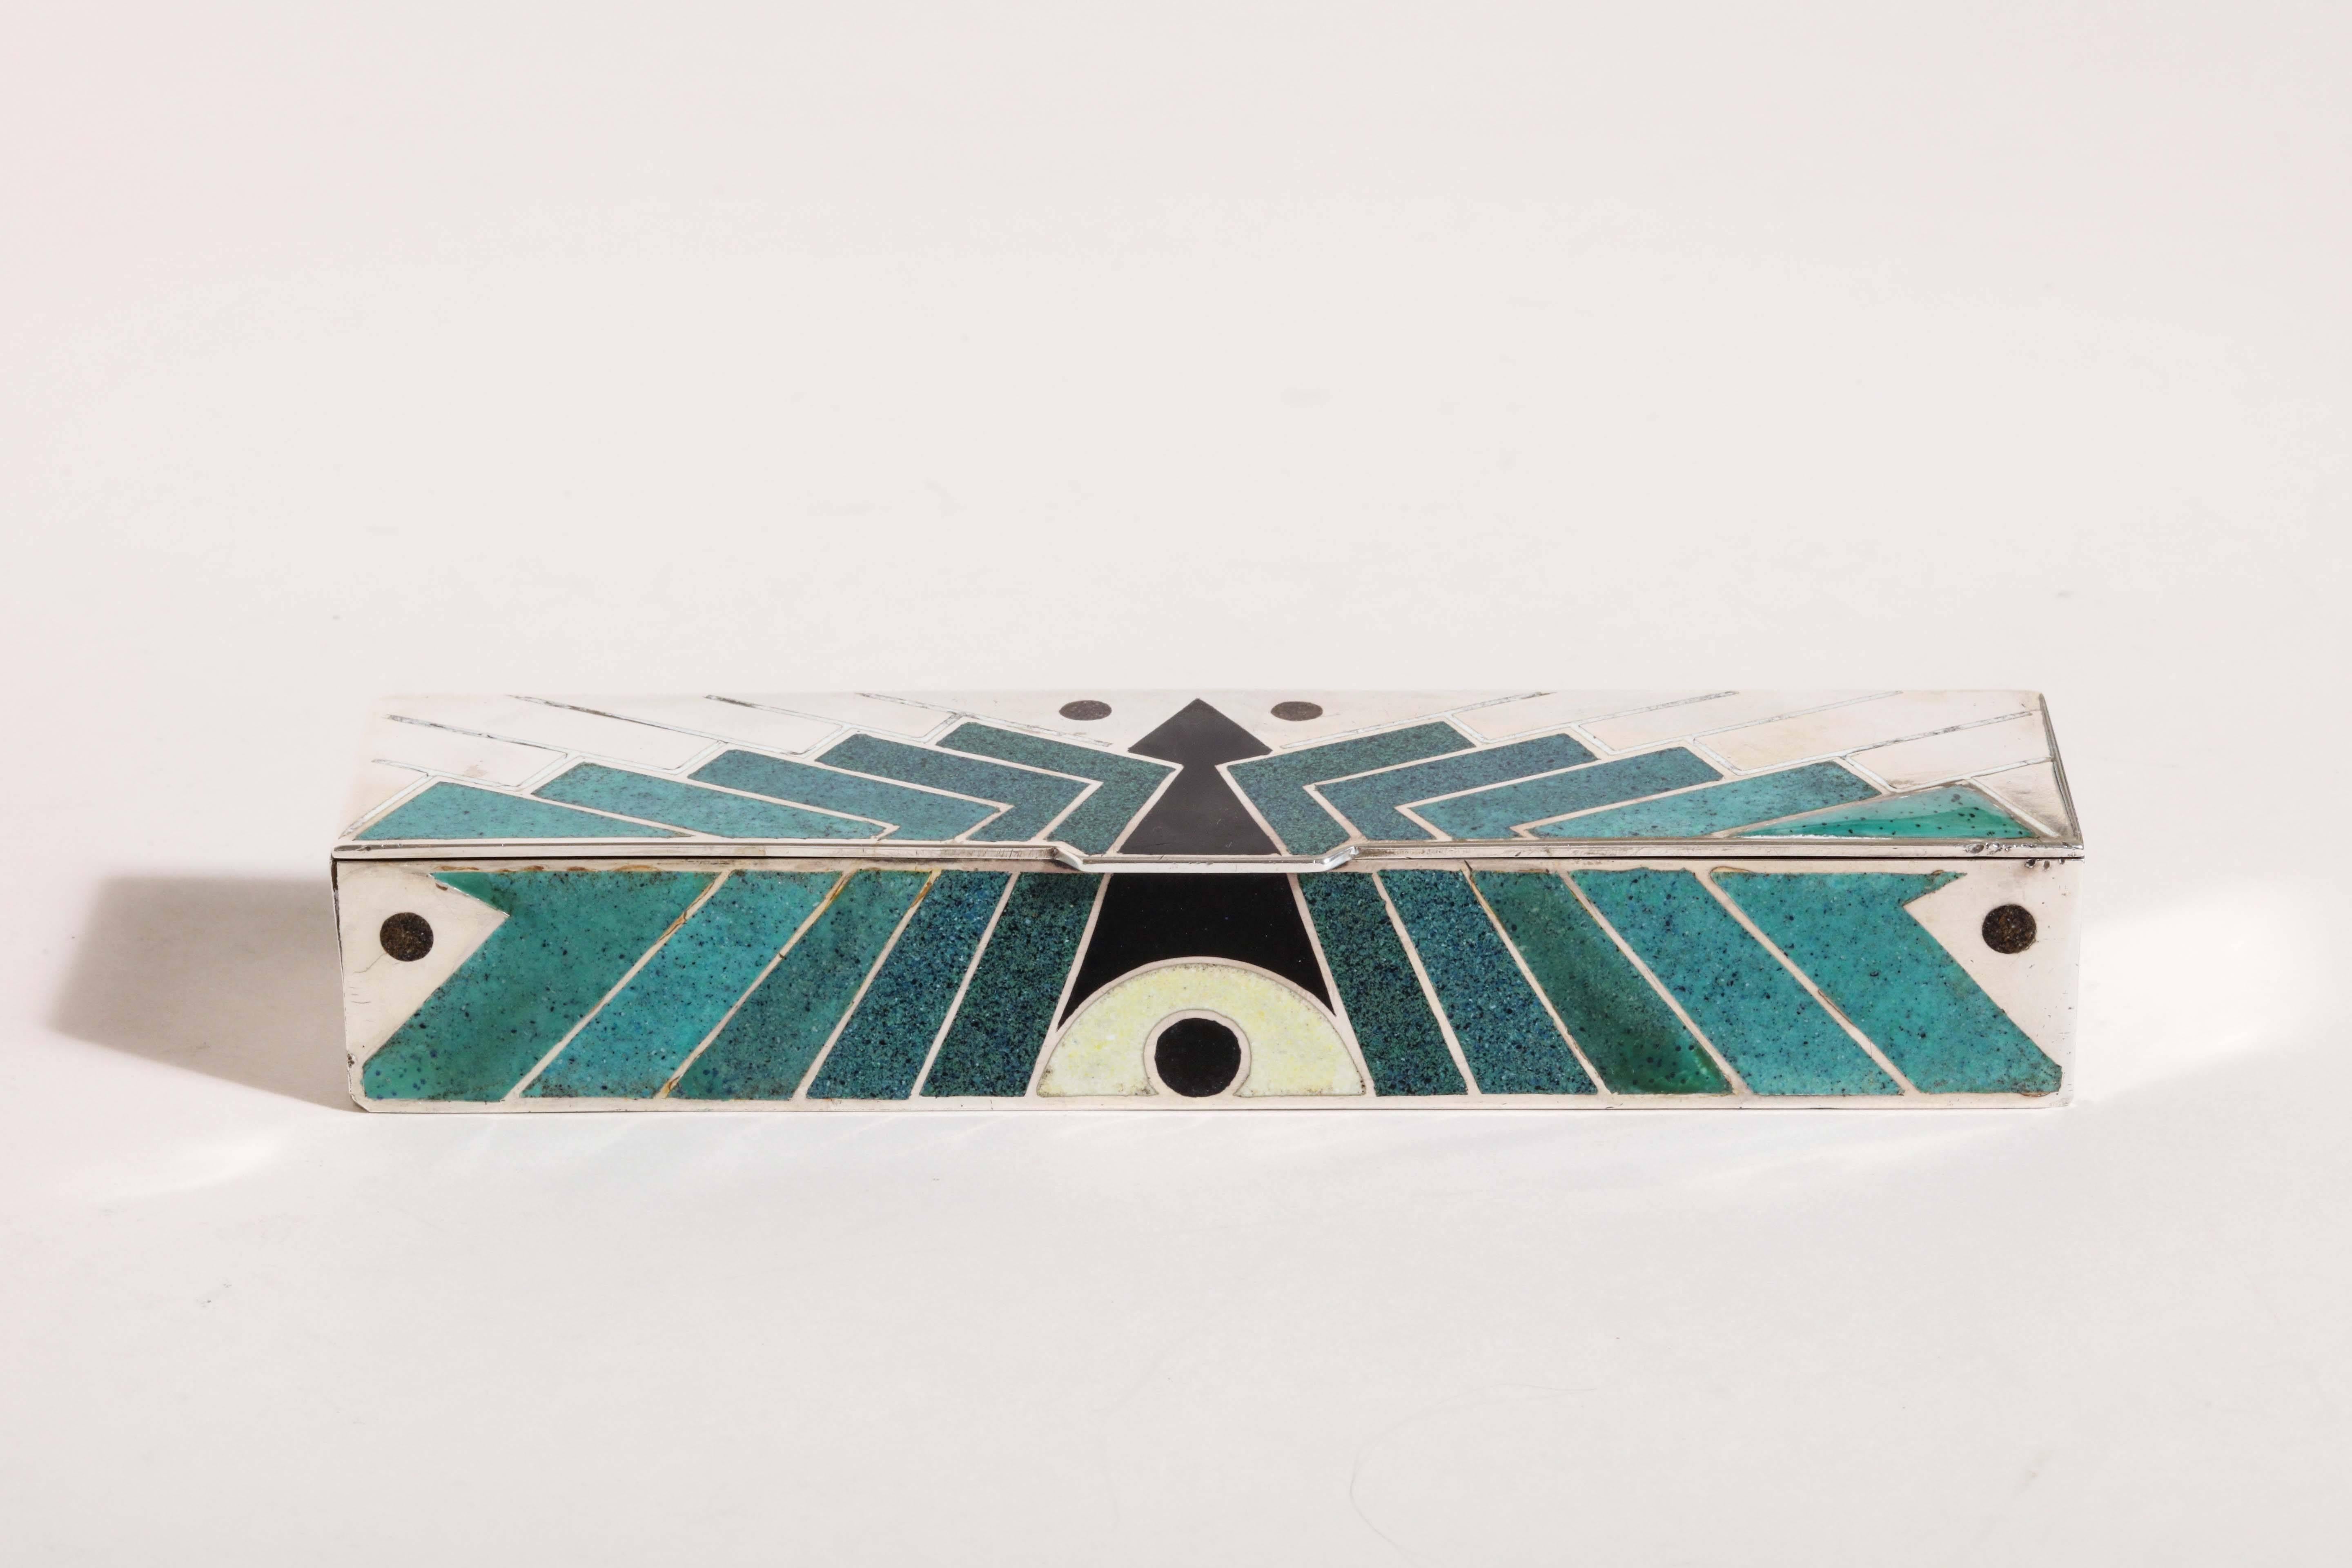 Measures: 6 ¾” wide; 1 ¾” long’ 1” high.
12.25 ozs. gross.

With green, blue and black geometric design in champlevé enamel.
Inscribed Jean Goulden/ LX 28/ Goulden silver poincon.

Provenance: Galerie du Luxembourg, Paris.
Exhibited: Galerie